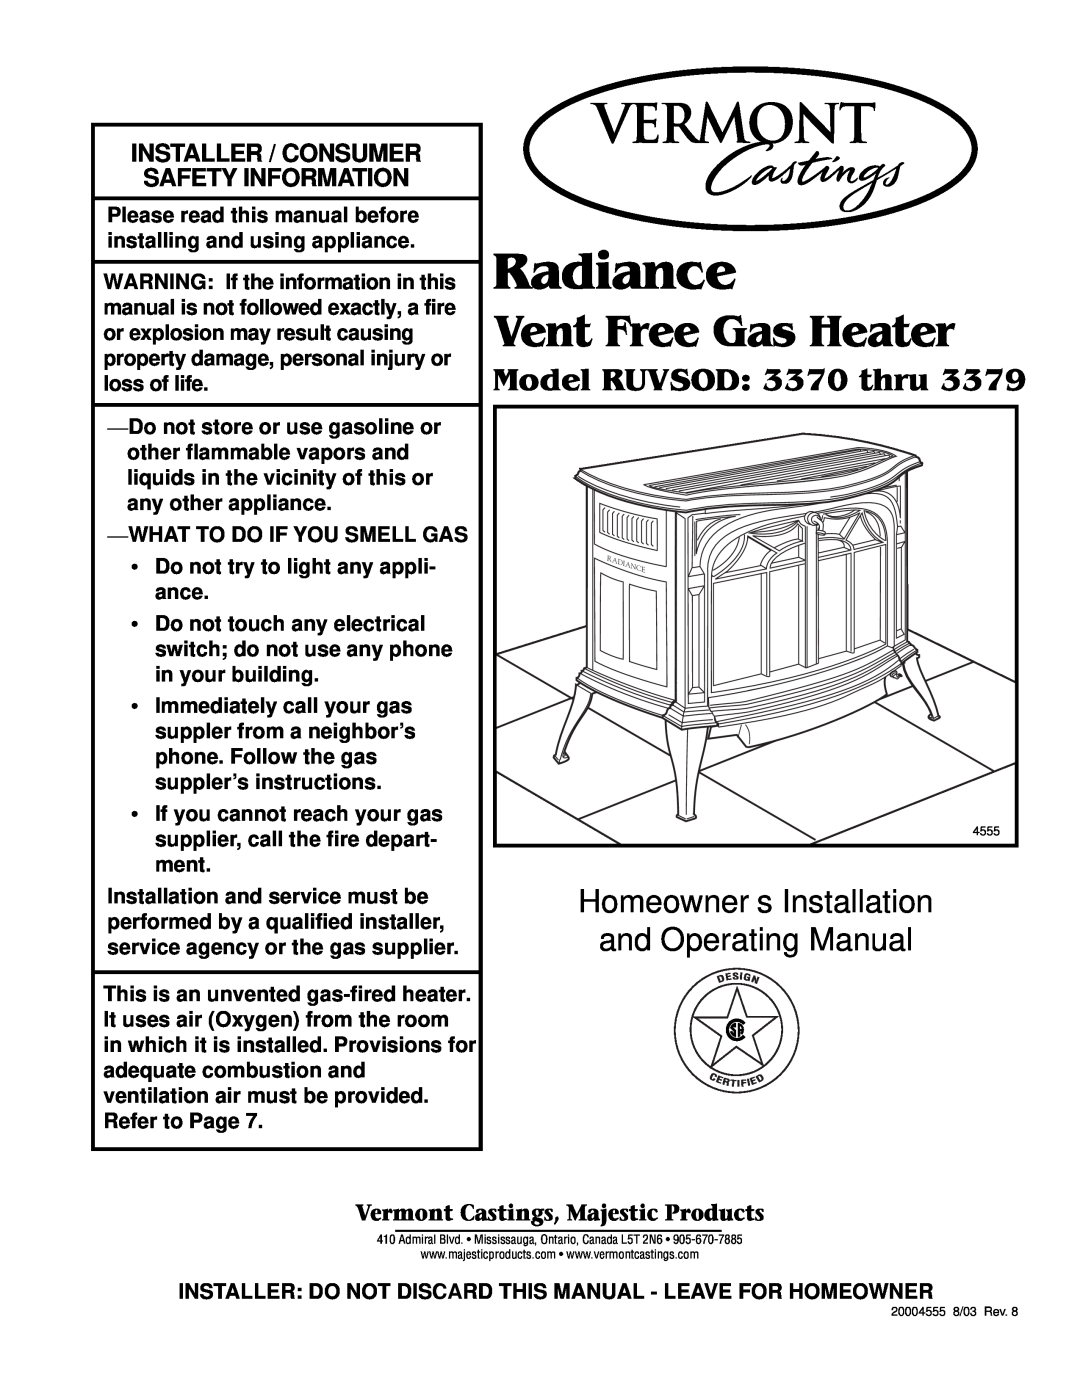 Majestic Appliances 3375, 3378, 3379, 3376, 3377 manual Vermont Castings, Majestic Products, Radiance, Vent Free Gas Heater 